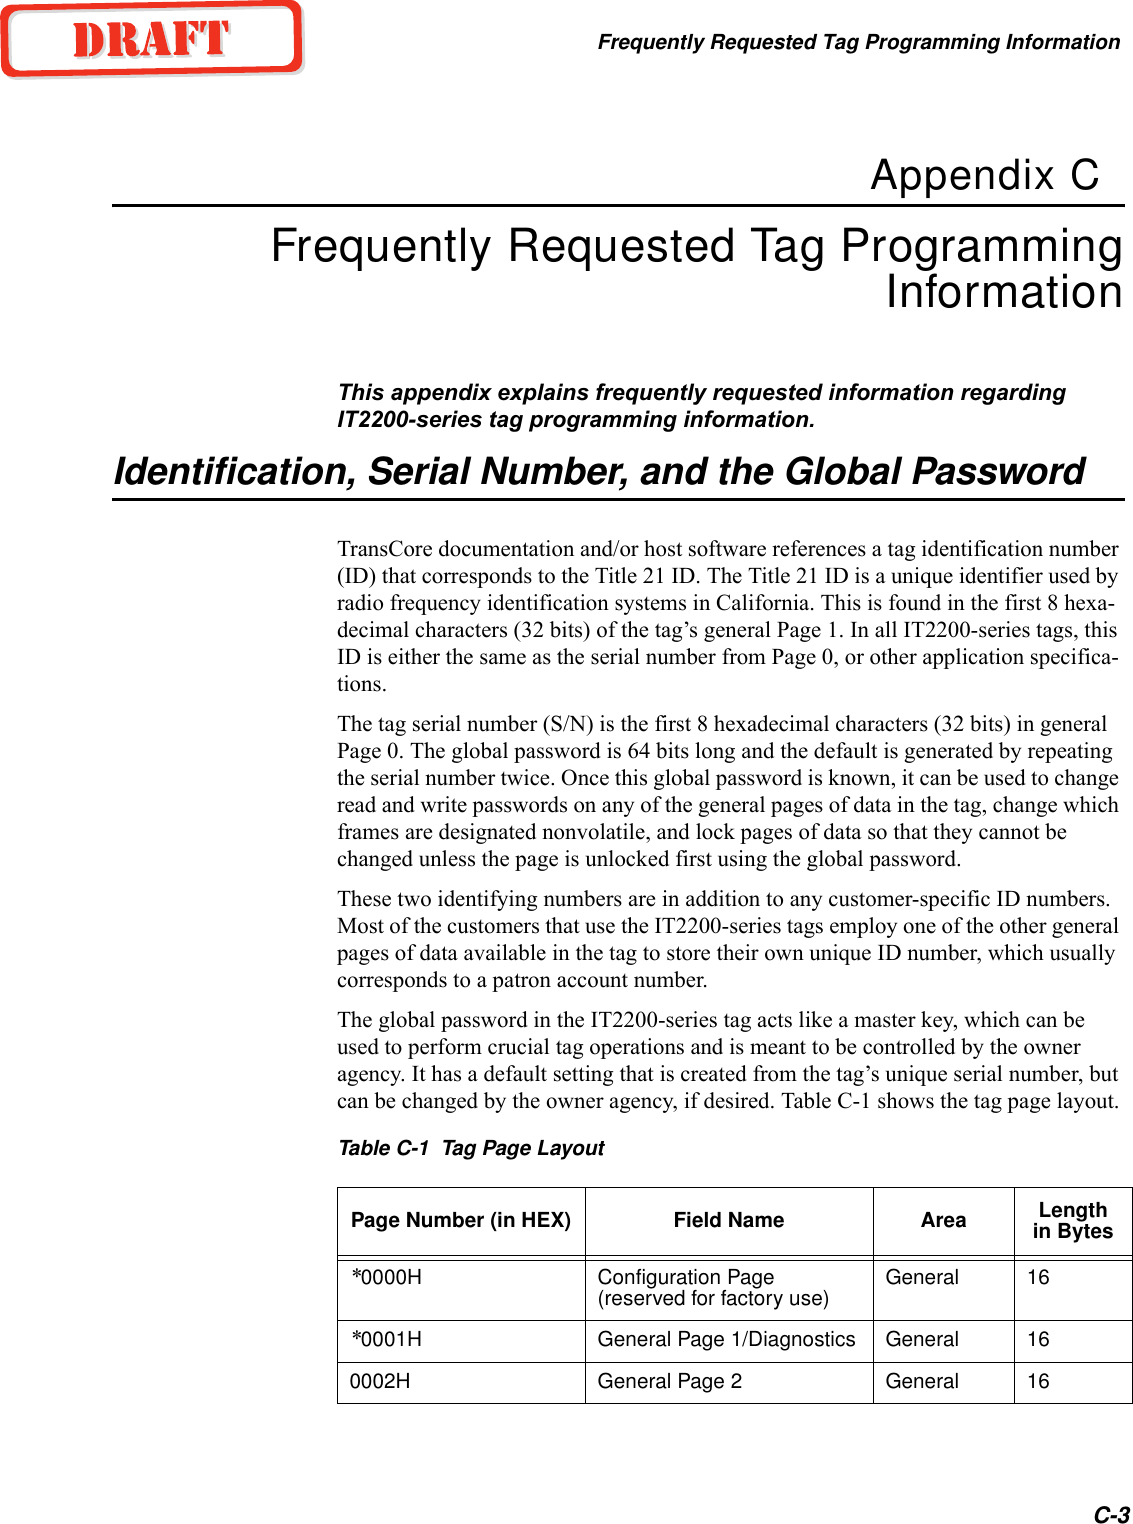 Frequently Requested Tag Programming InformationC-3Appendix CFrequently Requested Tag Programming InformationThis appendix explains frequently requested information regarding IT2200-series tag programming information.Identification, Serial Number, and the Global PasswordTransCore documentation and/or host software references a tag identification number (ID) that corresponds to the Title 21 ID. The Title 21 ID is a unique identifier used by radio frequency identification systems in California. This is found in the first 8 hexa-decimal characters (32 bits) of the tag’s general Page 1. In all IT2200-series tags, this ID is either the same as the serial number from Page 0, or other application specifica-tions.The tag serial number (S/N) is the first 8 hexadecimal characters (32 bits) in general Page 0. The global password is 64 bits long and the default is generated by repeating the serial number twice. Once this global password is known, it can be used to change read and write passwords on any of the general pages of data in the tag, change which frames are designated nonvolatile, and lock pages of data so that they cannot be changed unless the page is unlocked first using the global password.These two identifying numbers are in addition to any customer-specific ID numbers. Most of the customers that use the IT2200-series tags employ one of the other general pages of data available in the tag to store their own unique ID number, which usually corresponds to a patron account number.The global password in the IT2200-series tag acts like a master key, which can be used to perform crucial tag operations and is meant to be controlled by the owner agency. It has a default setting that is created from the tag’s unique serial number, but can be changed by the owner agency, if desired. Table C-1 shows the tag page layout.Table C-1  Tag Page Layout Page Number (in HEX) Field Name Area Length in Bytes*0000H Configuration Page (reserved for factory use) General 16*0001H General Page 1/Diagnostics General 160002H General Page 2 General 16